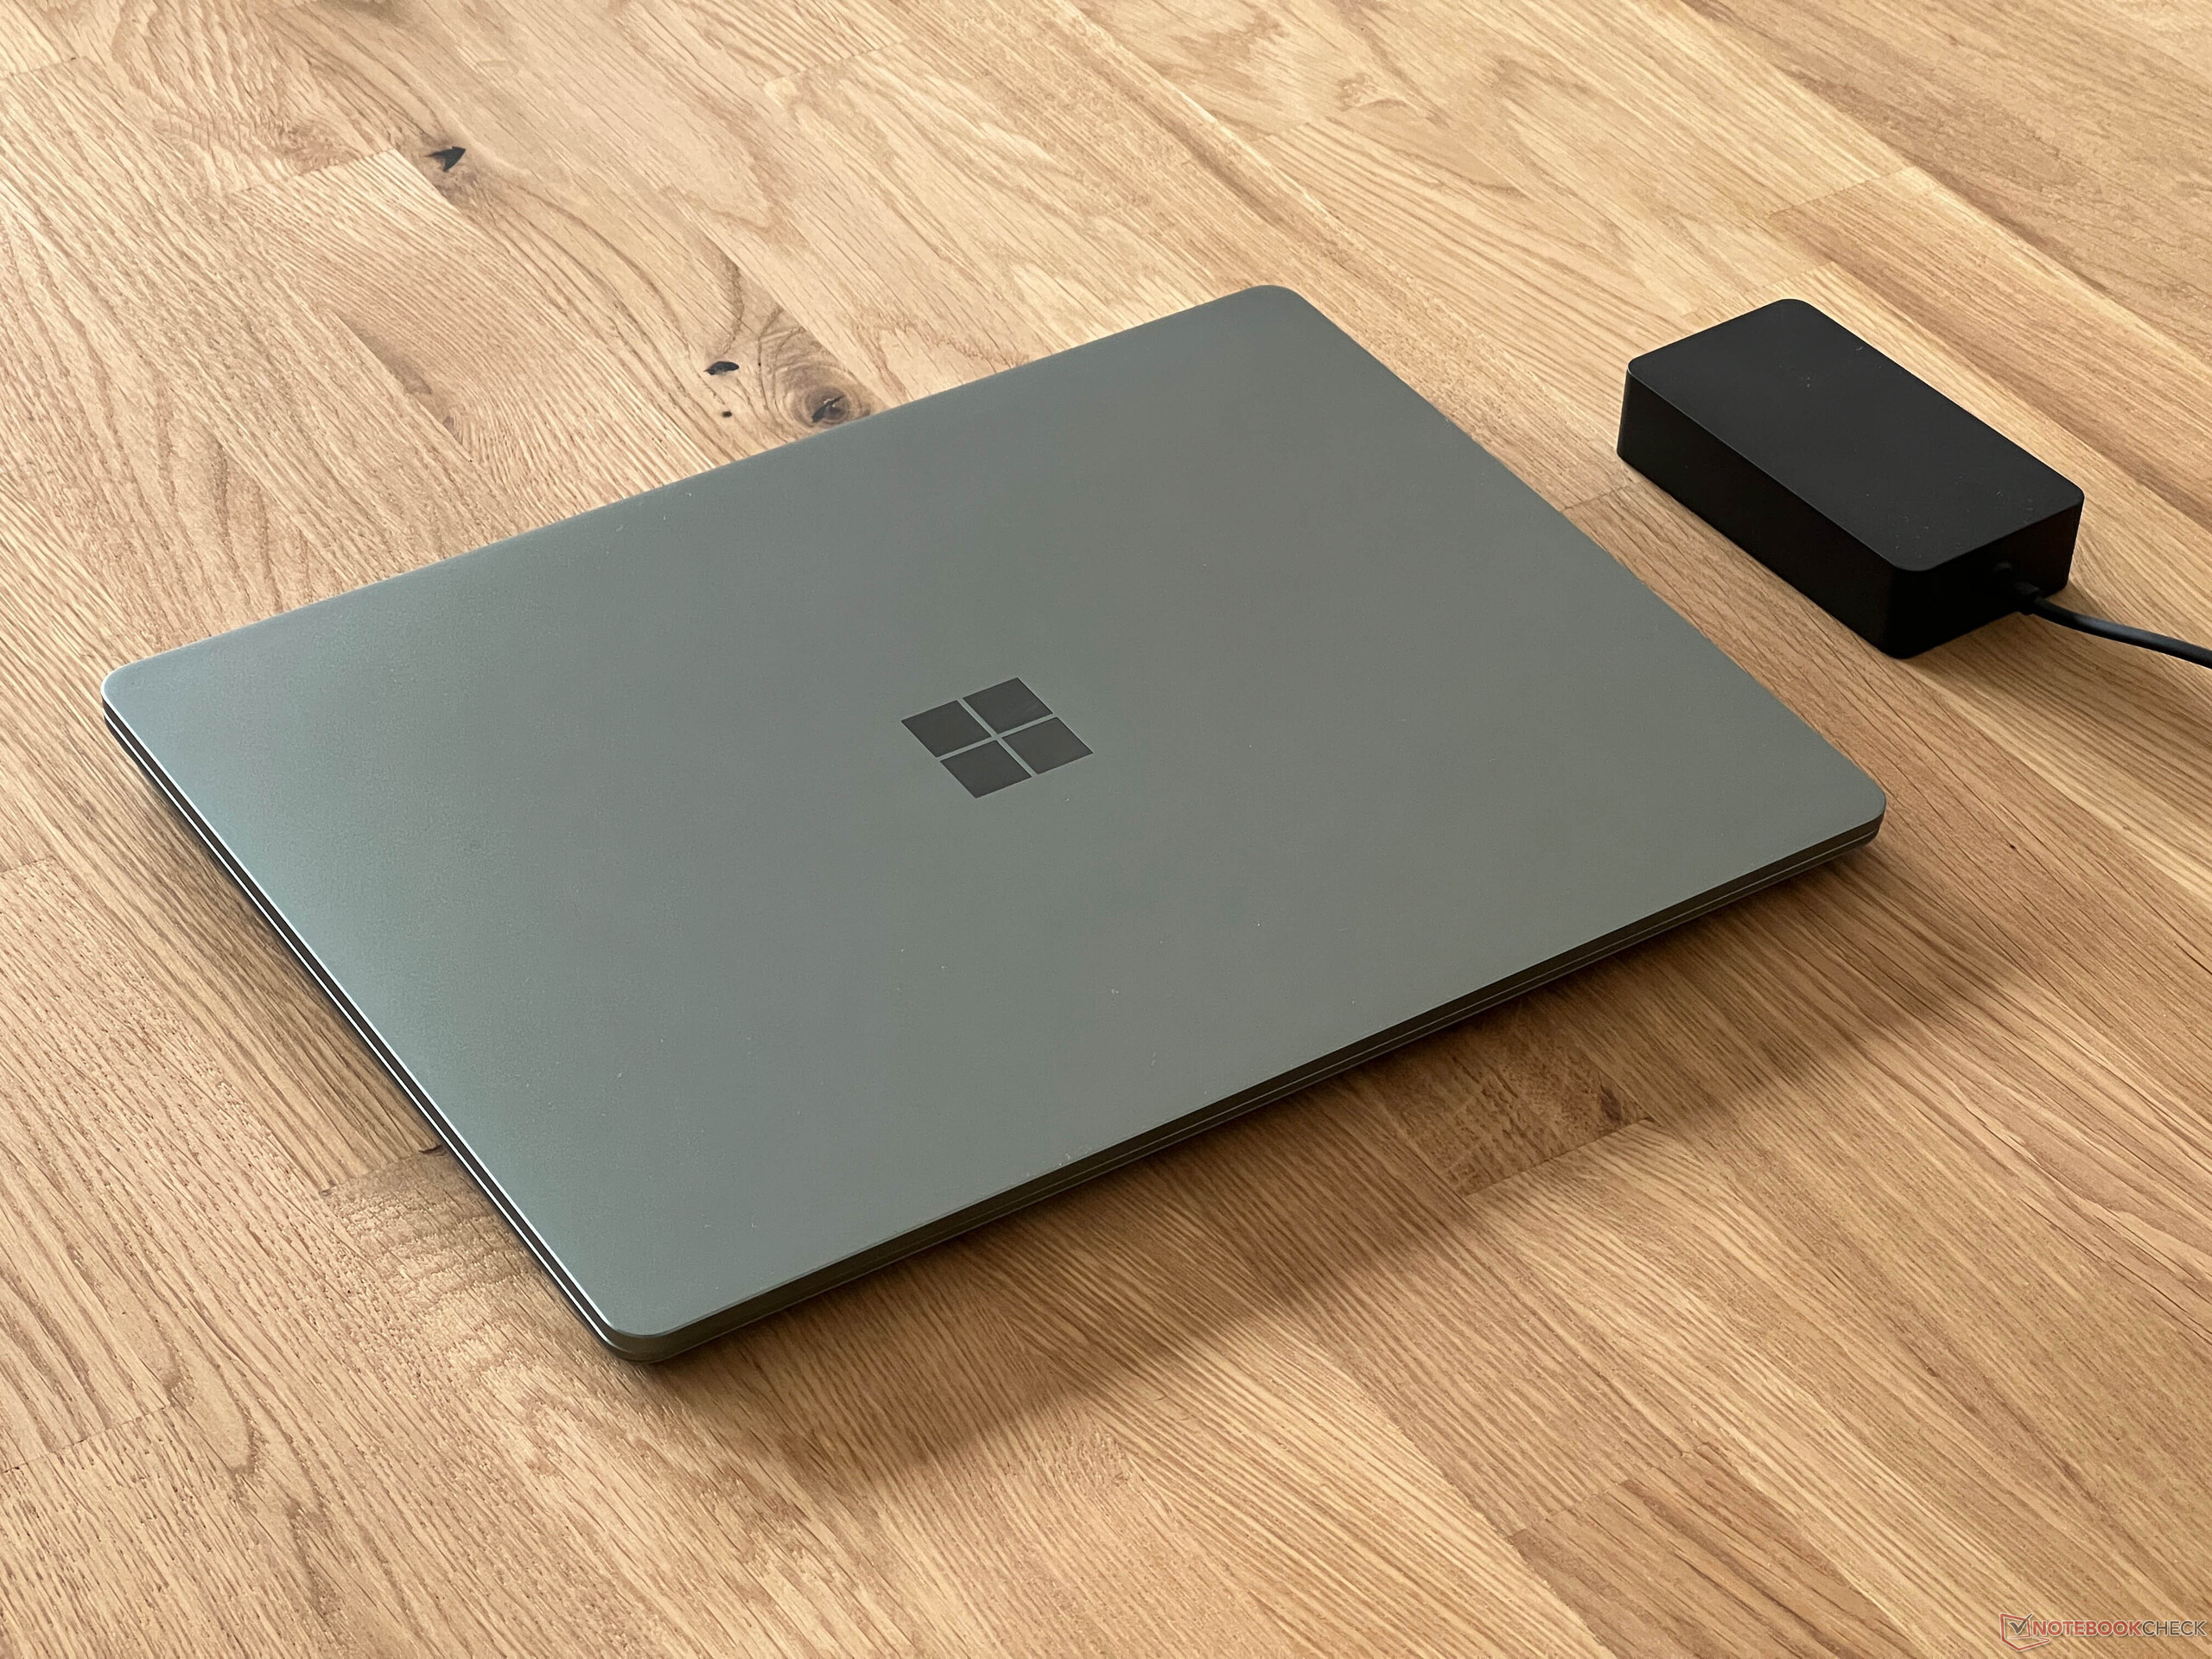 Microsoft Surface Laptop Go 3 review: Portable laptop good for everyday use